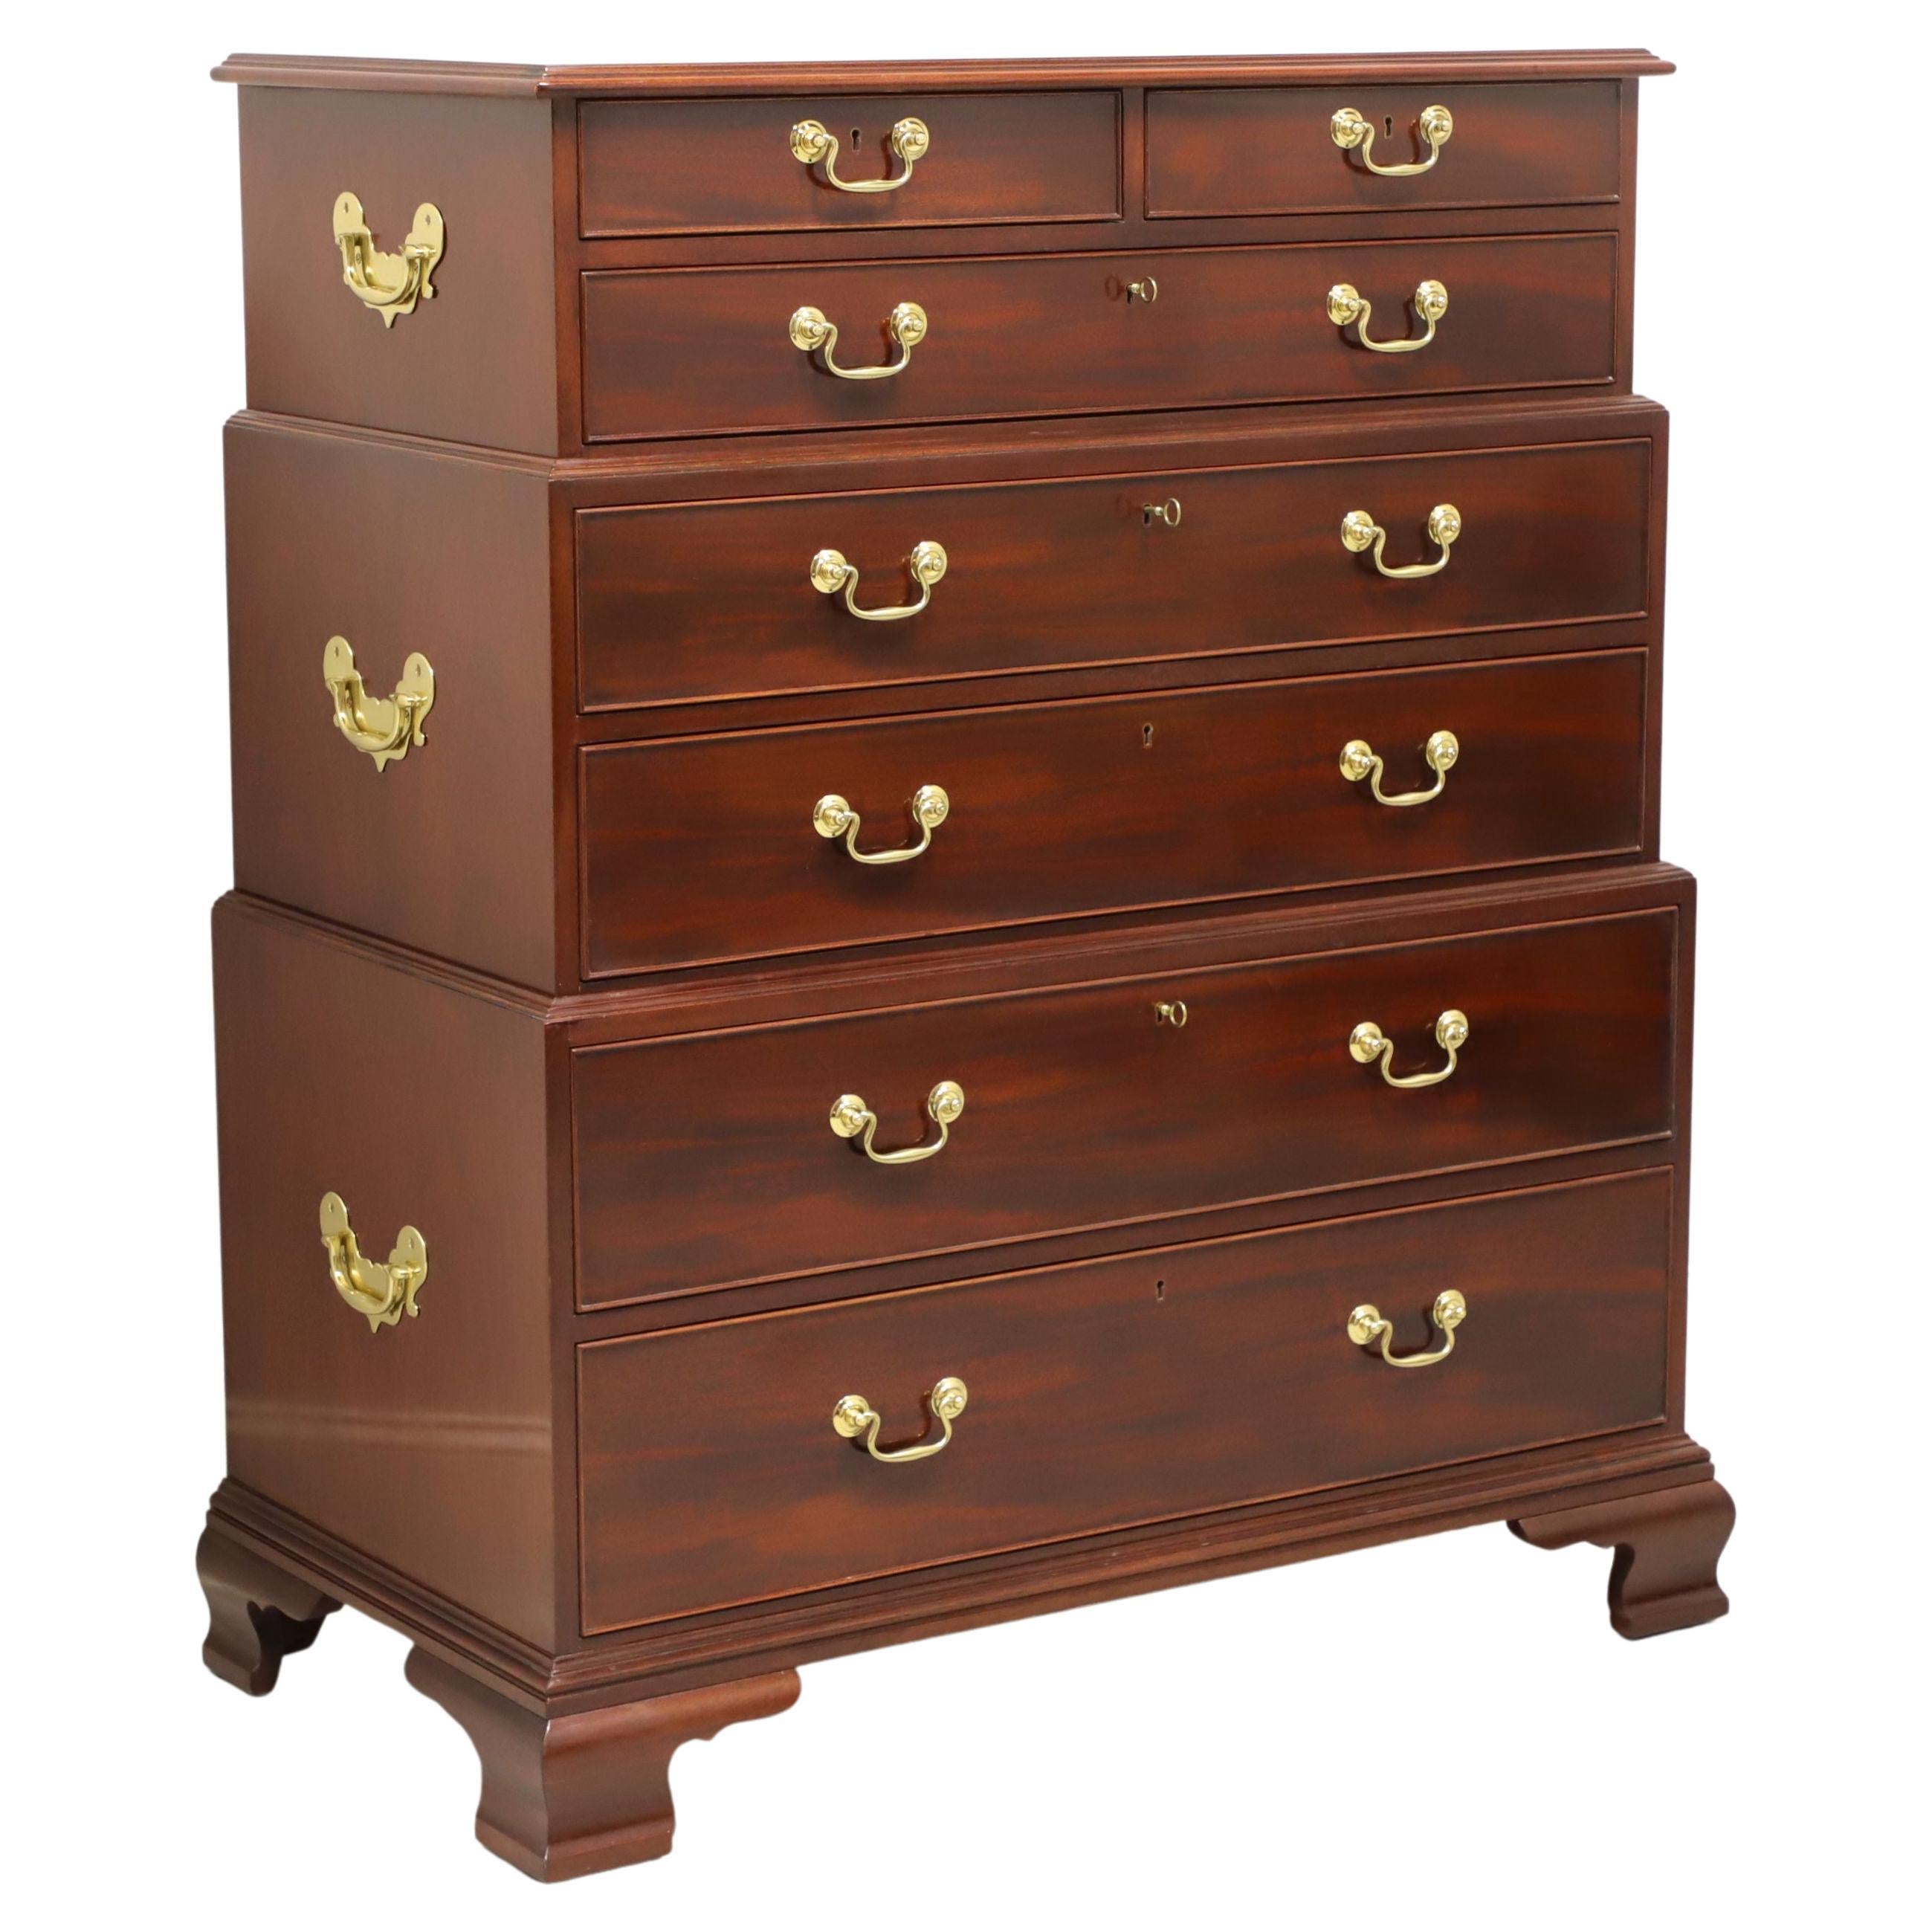 BAKER Historic Charleston Mahogany Chippendale Style Three-Tier Chest on Chest